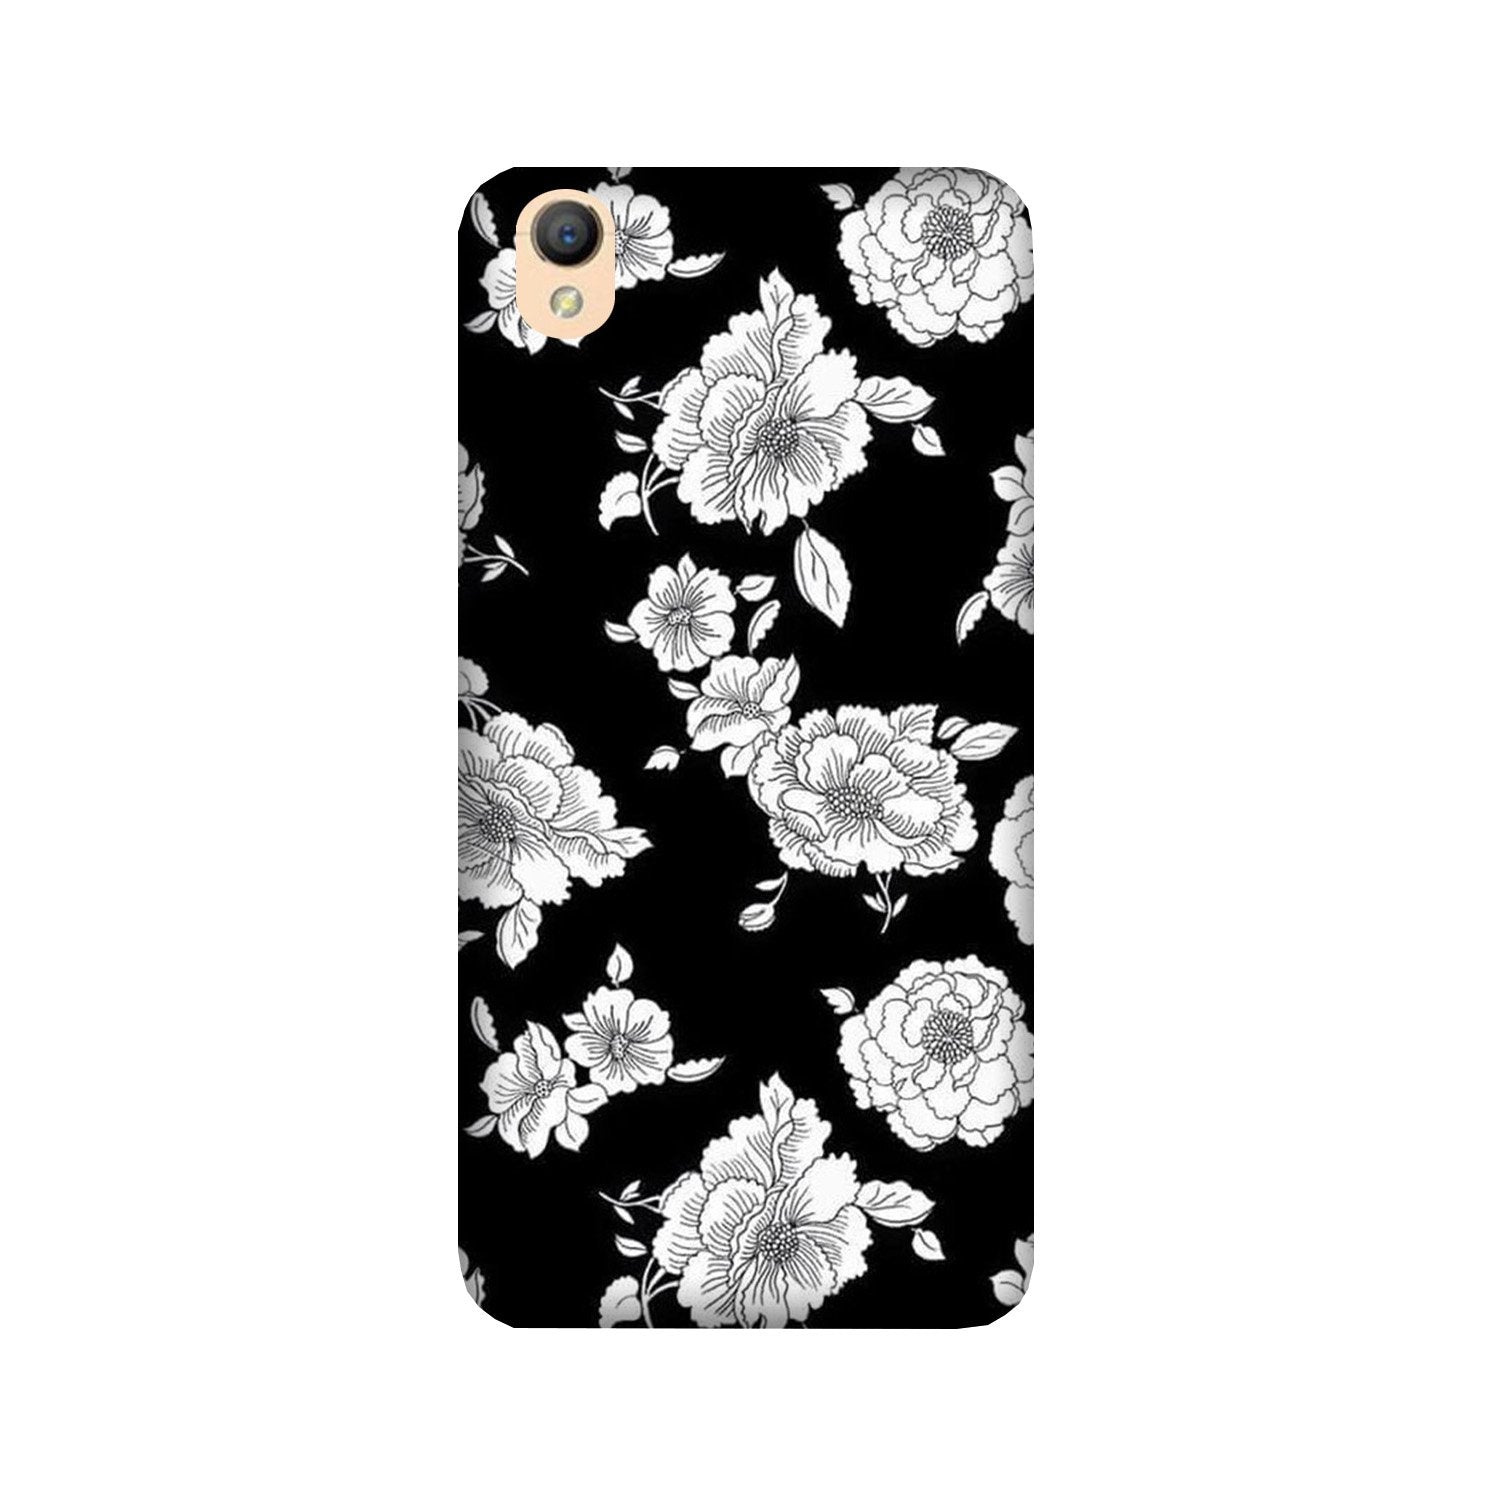 White flowers Black Background Case for Oppo A37